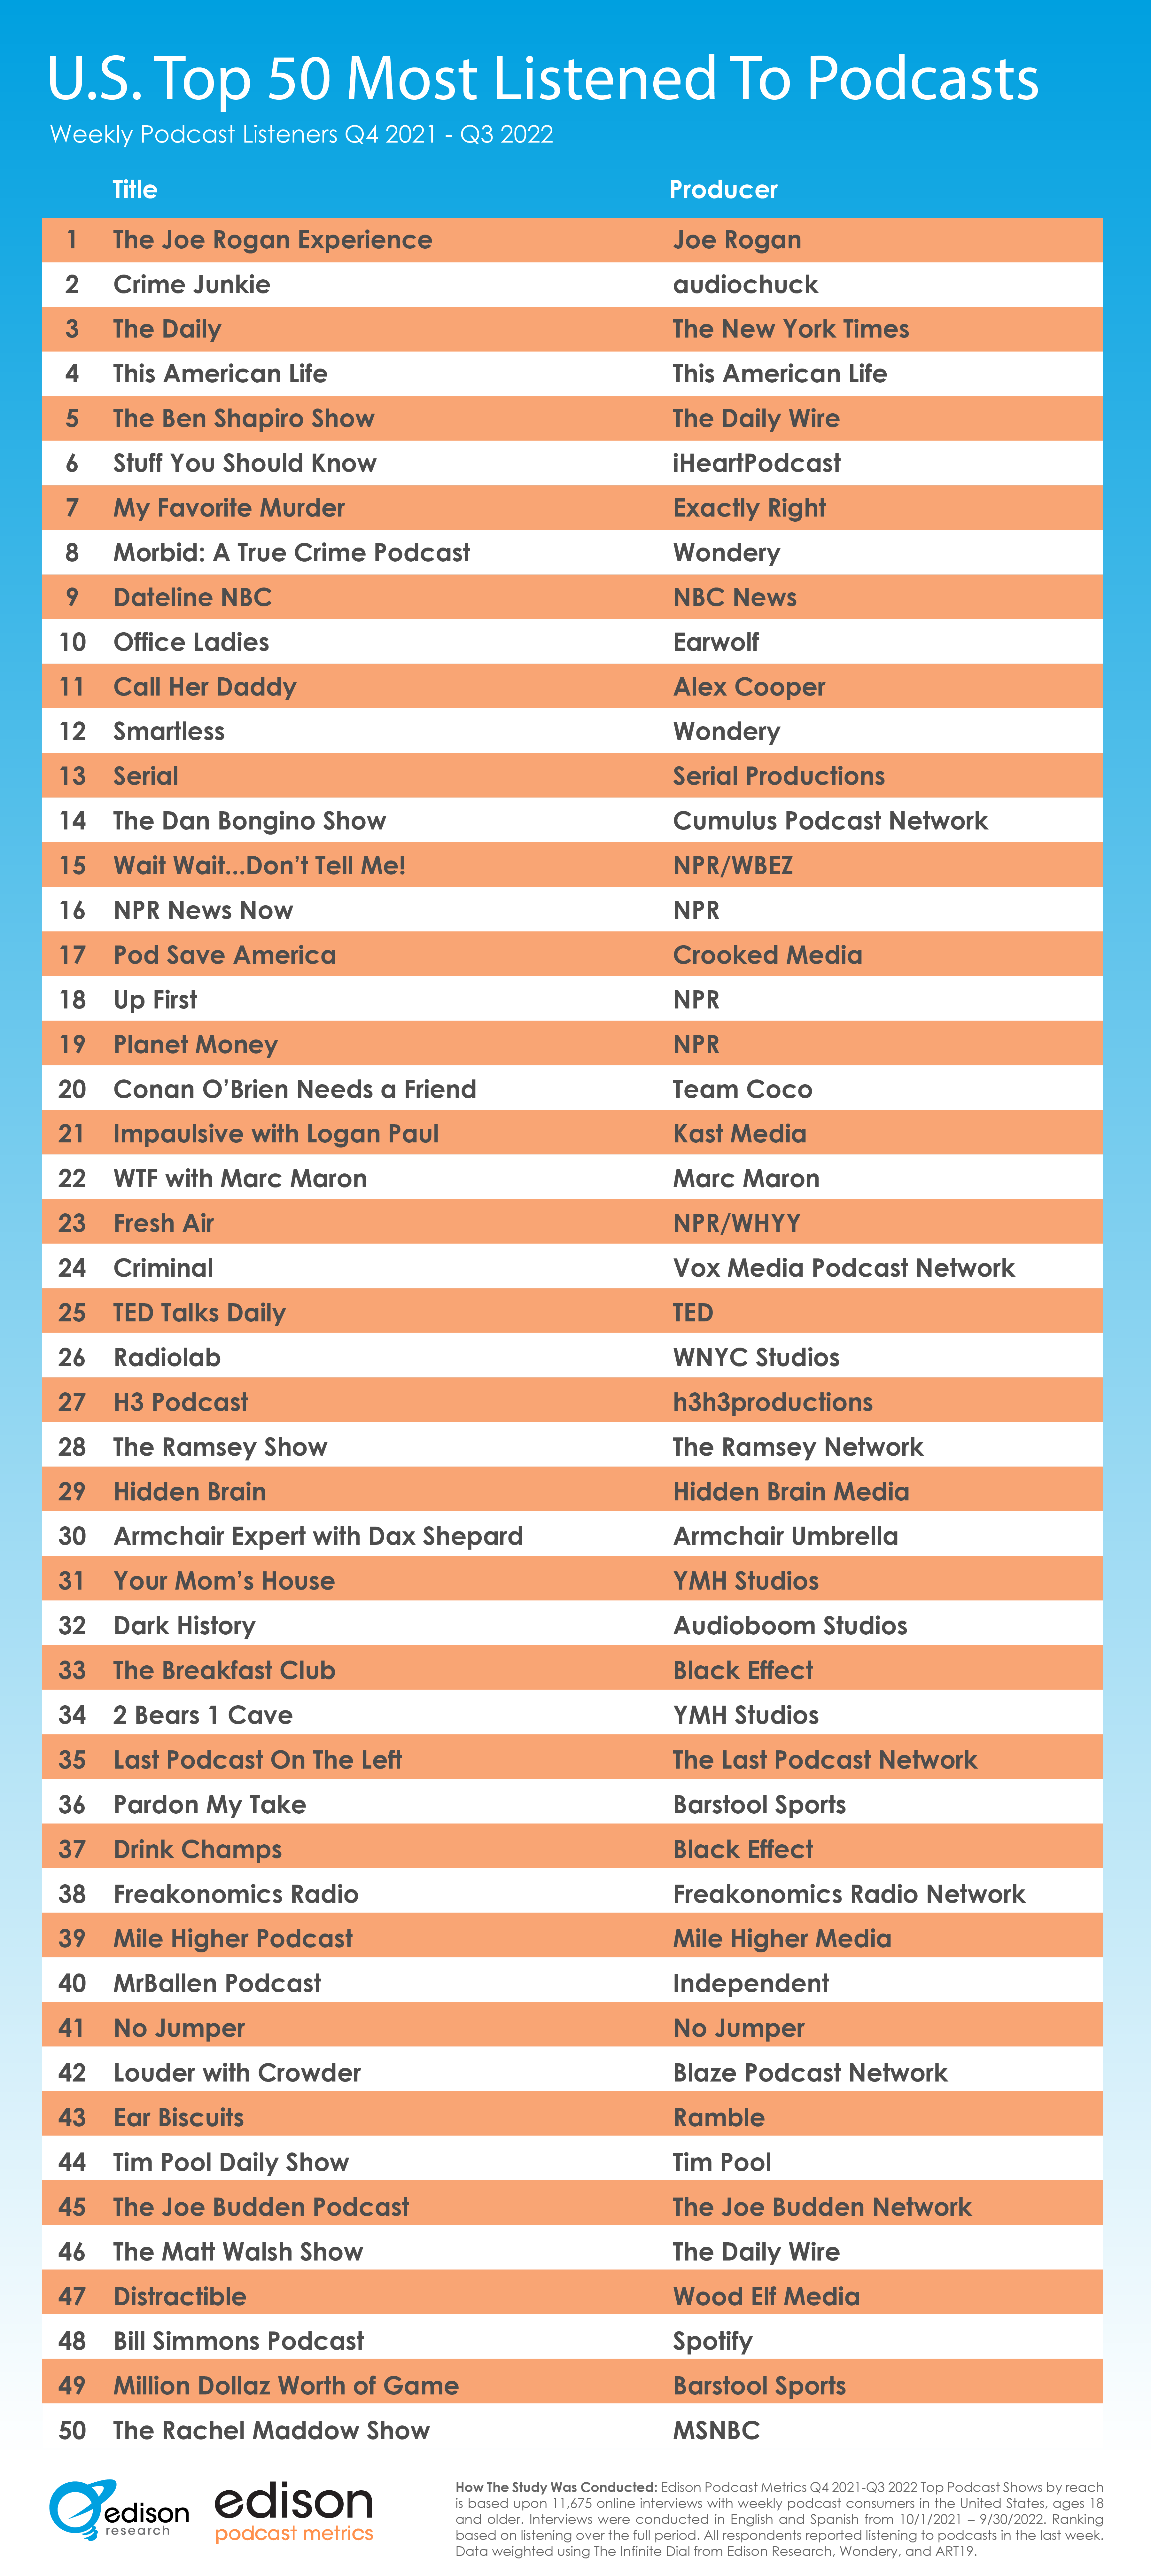 makker sporadisk Delegation The Top 50 Most Listened To Podcasts in the U.S. Q3 2022 - Edison Research